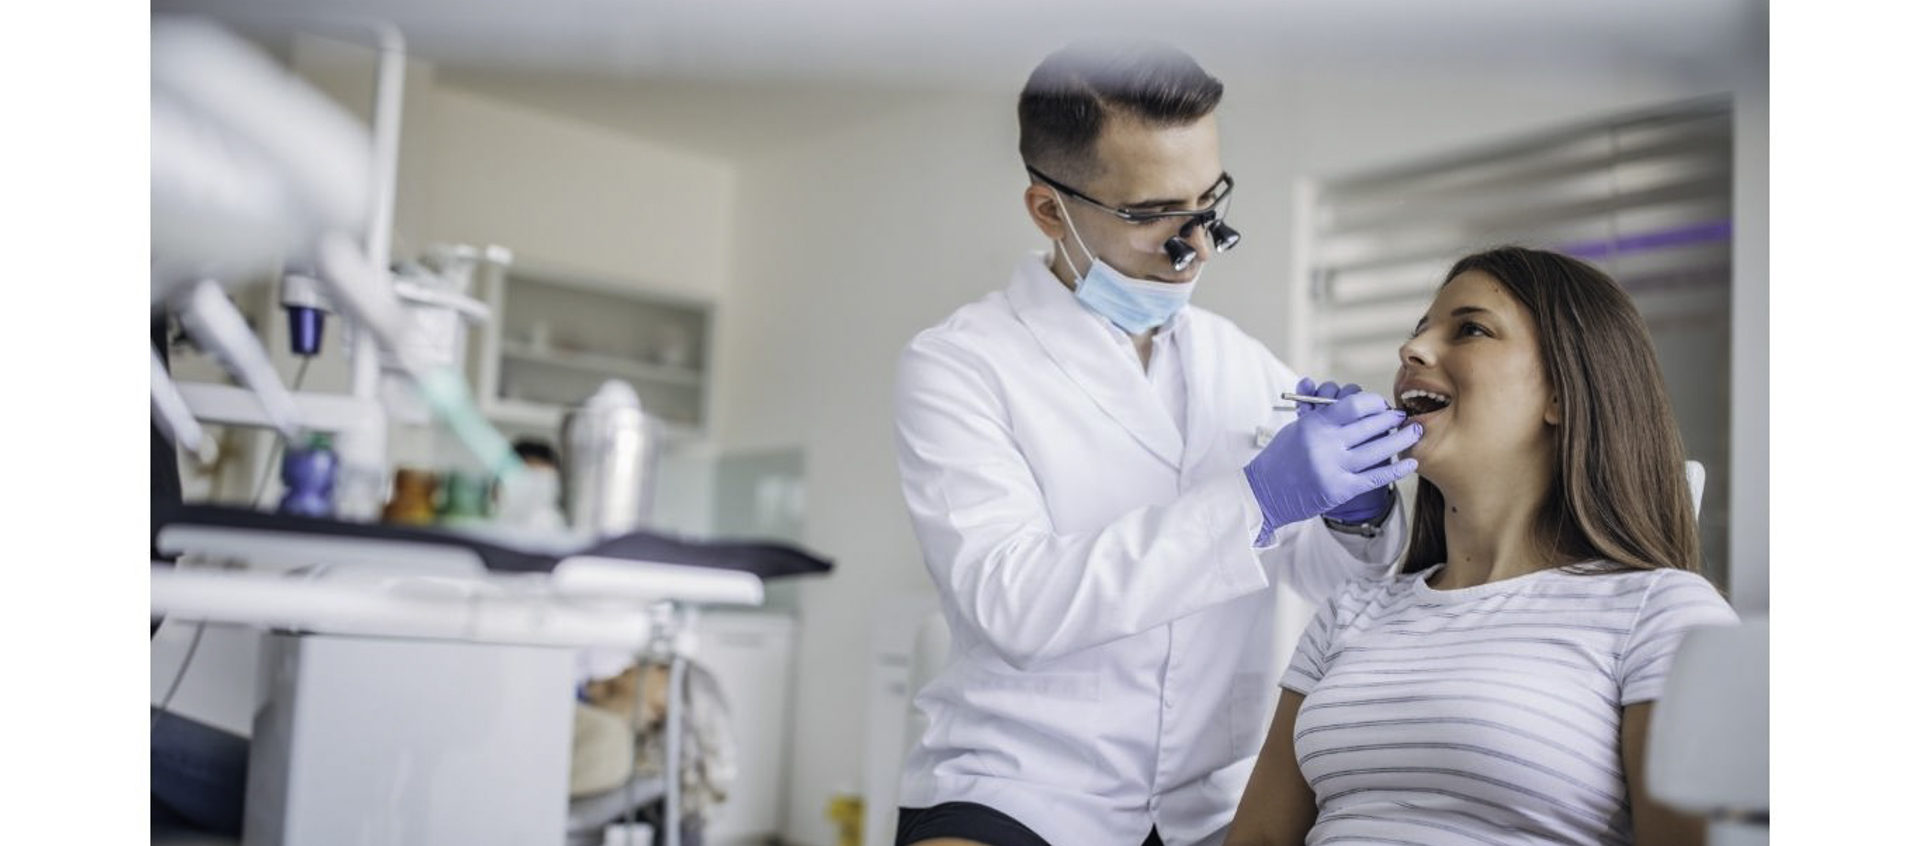 A dental check-up with your family dental office